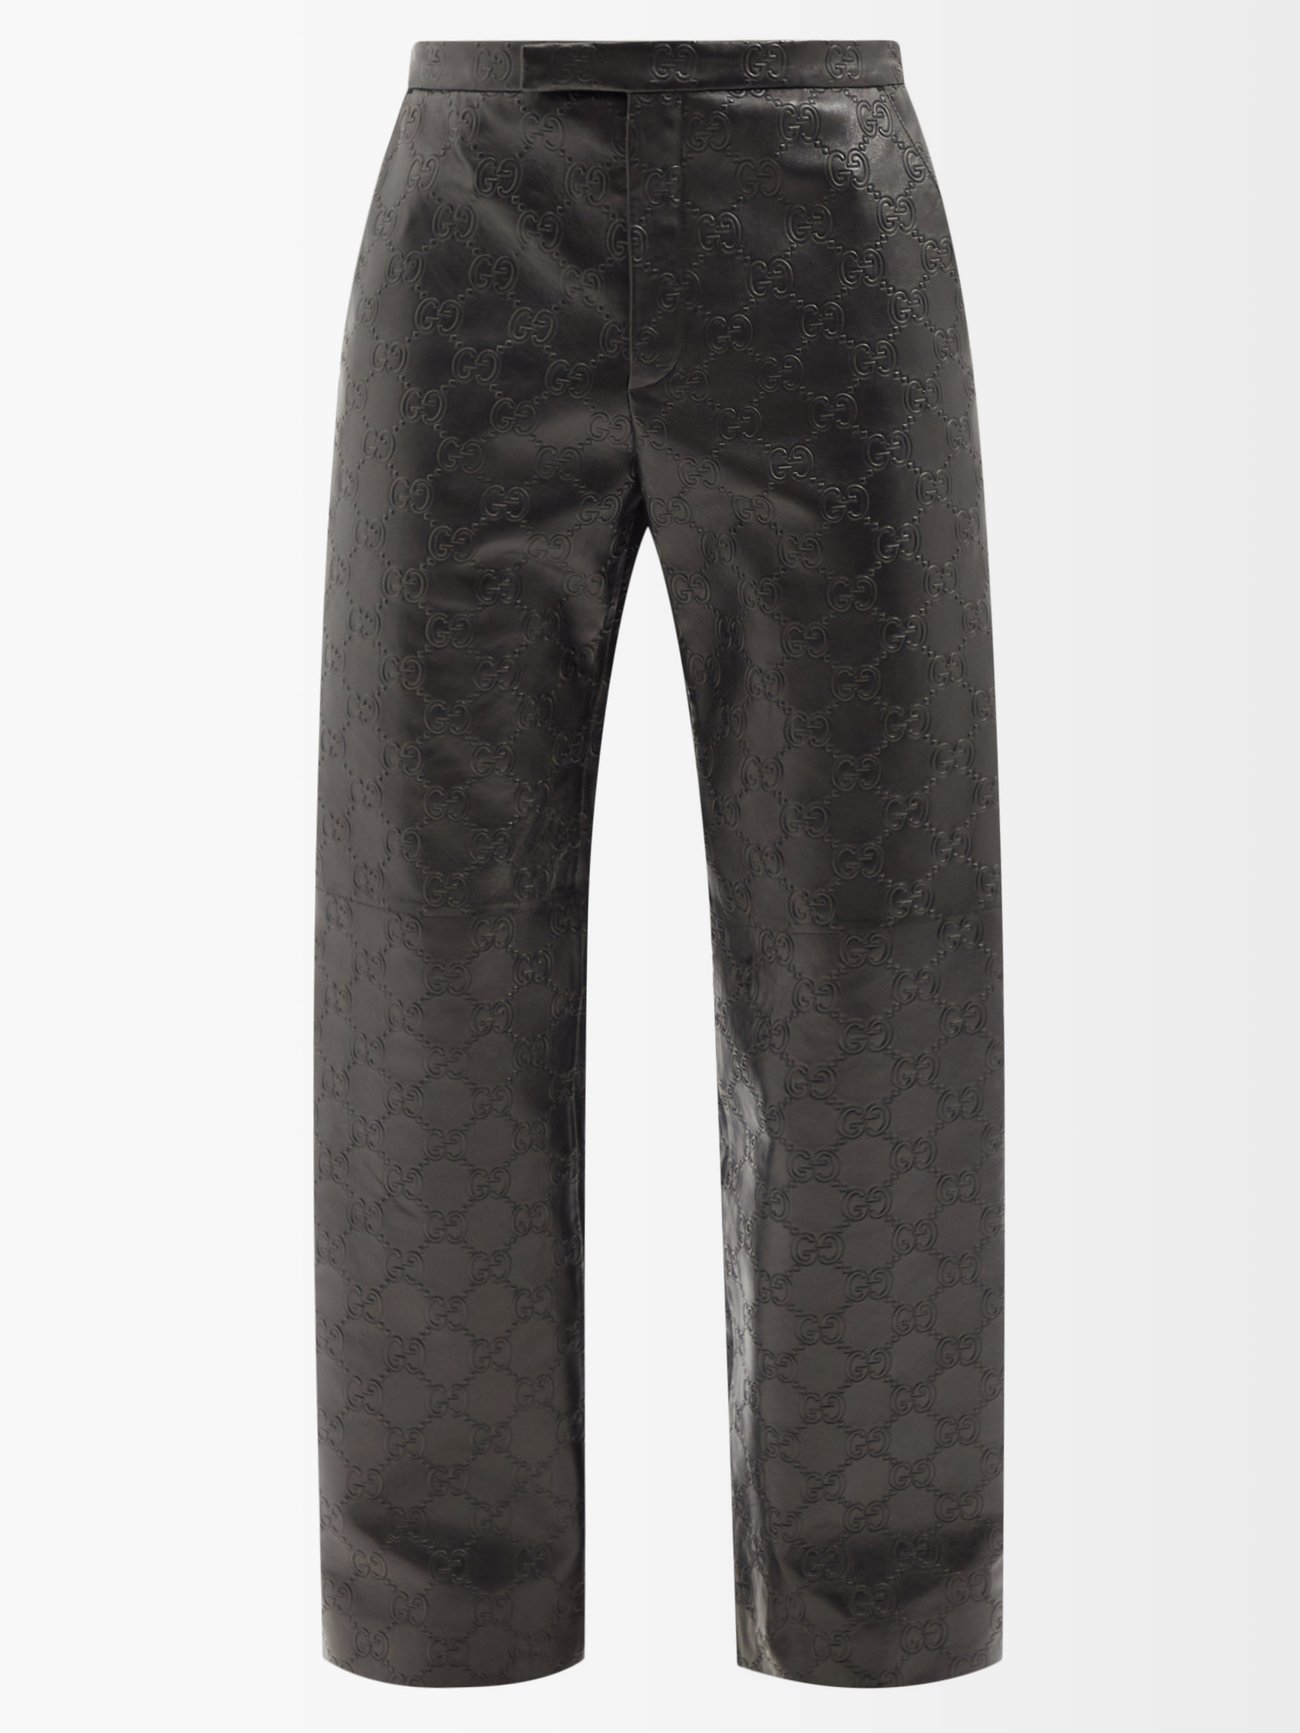 Black GG-embossed leather suit trousers, Gucci